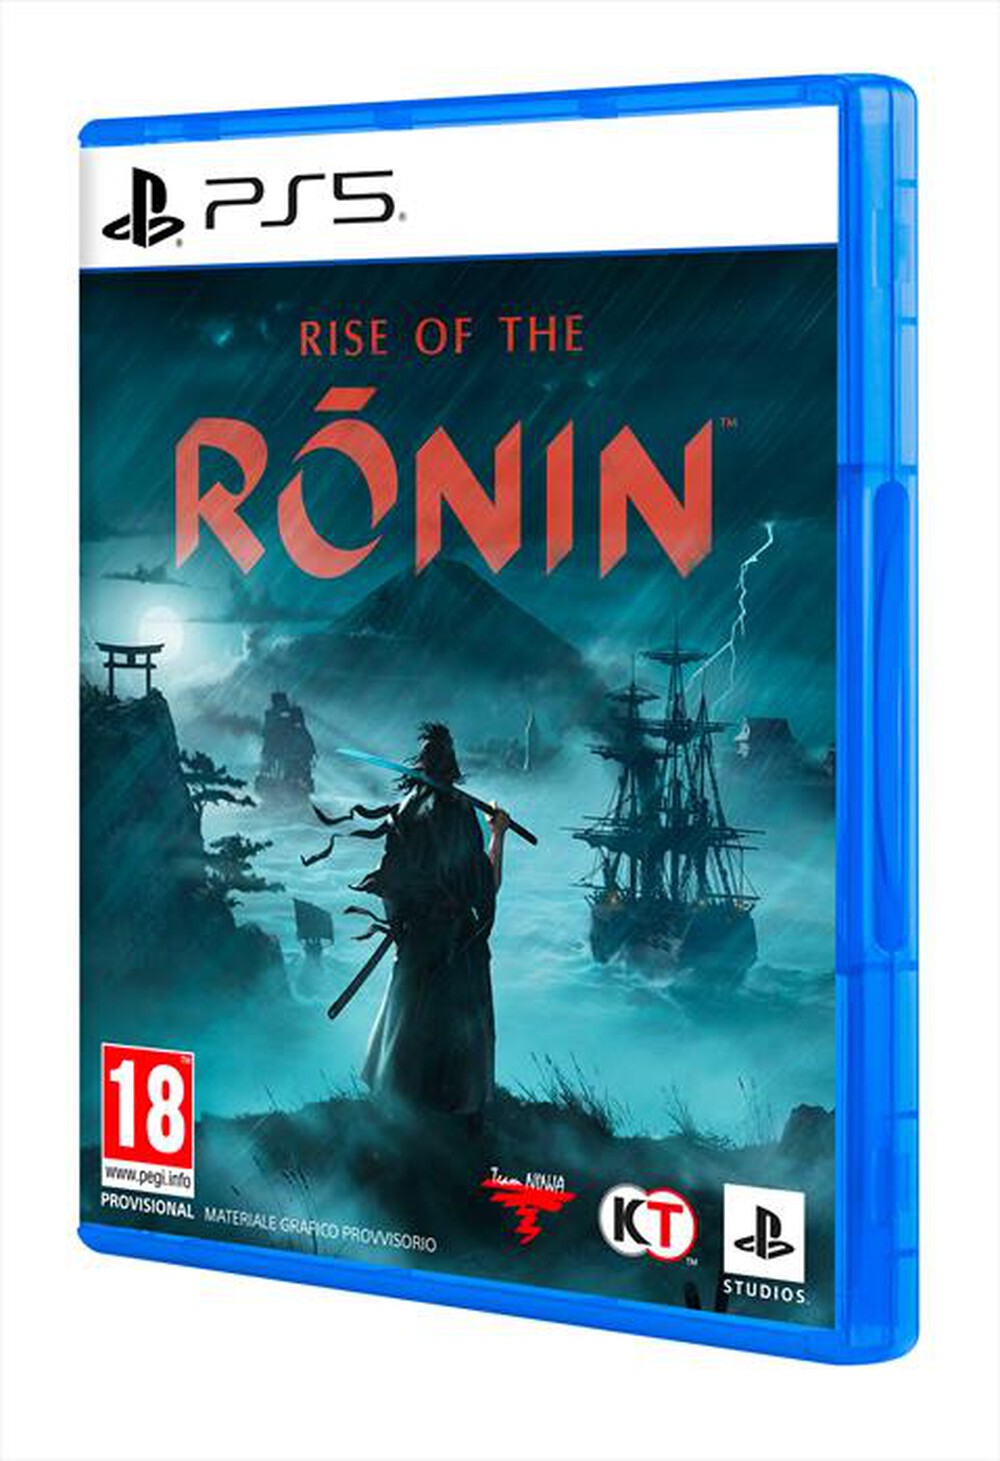 "SONY COMPUTER - RISE OF THE RONIN™ PS5"